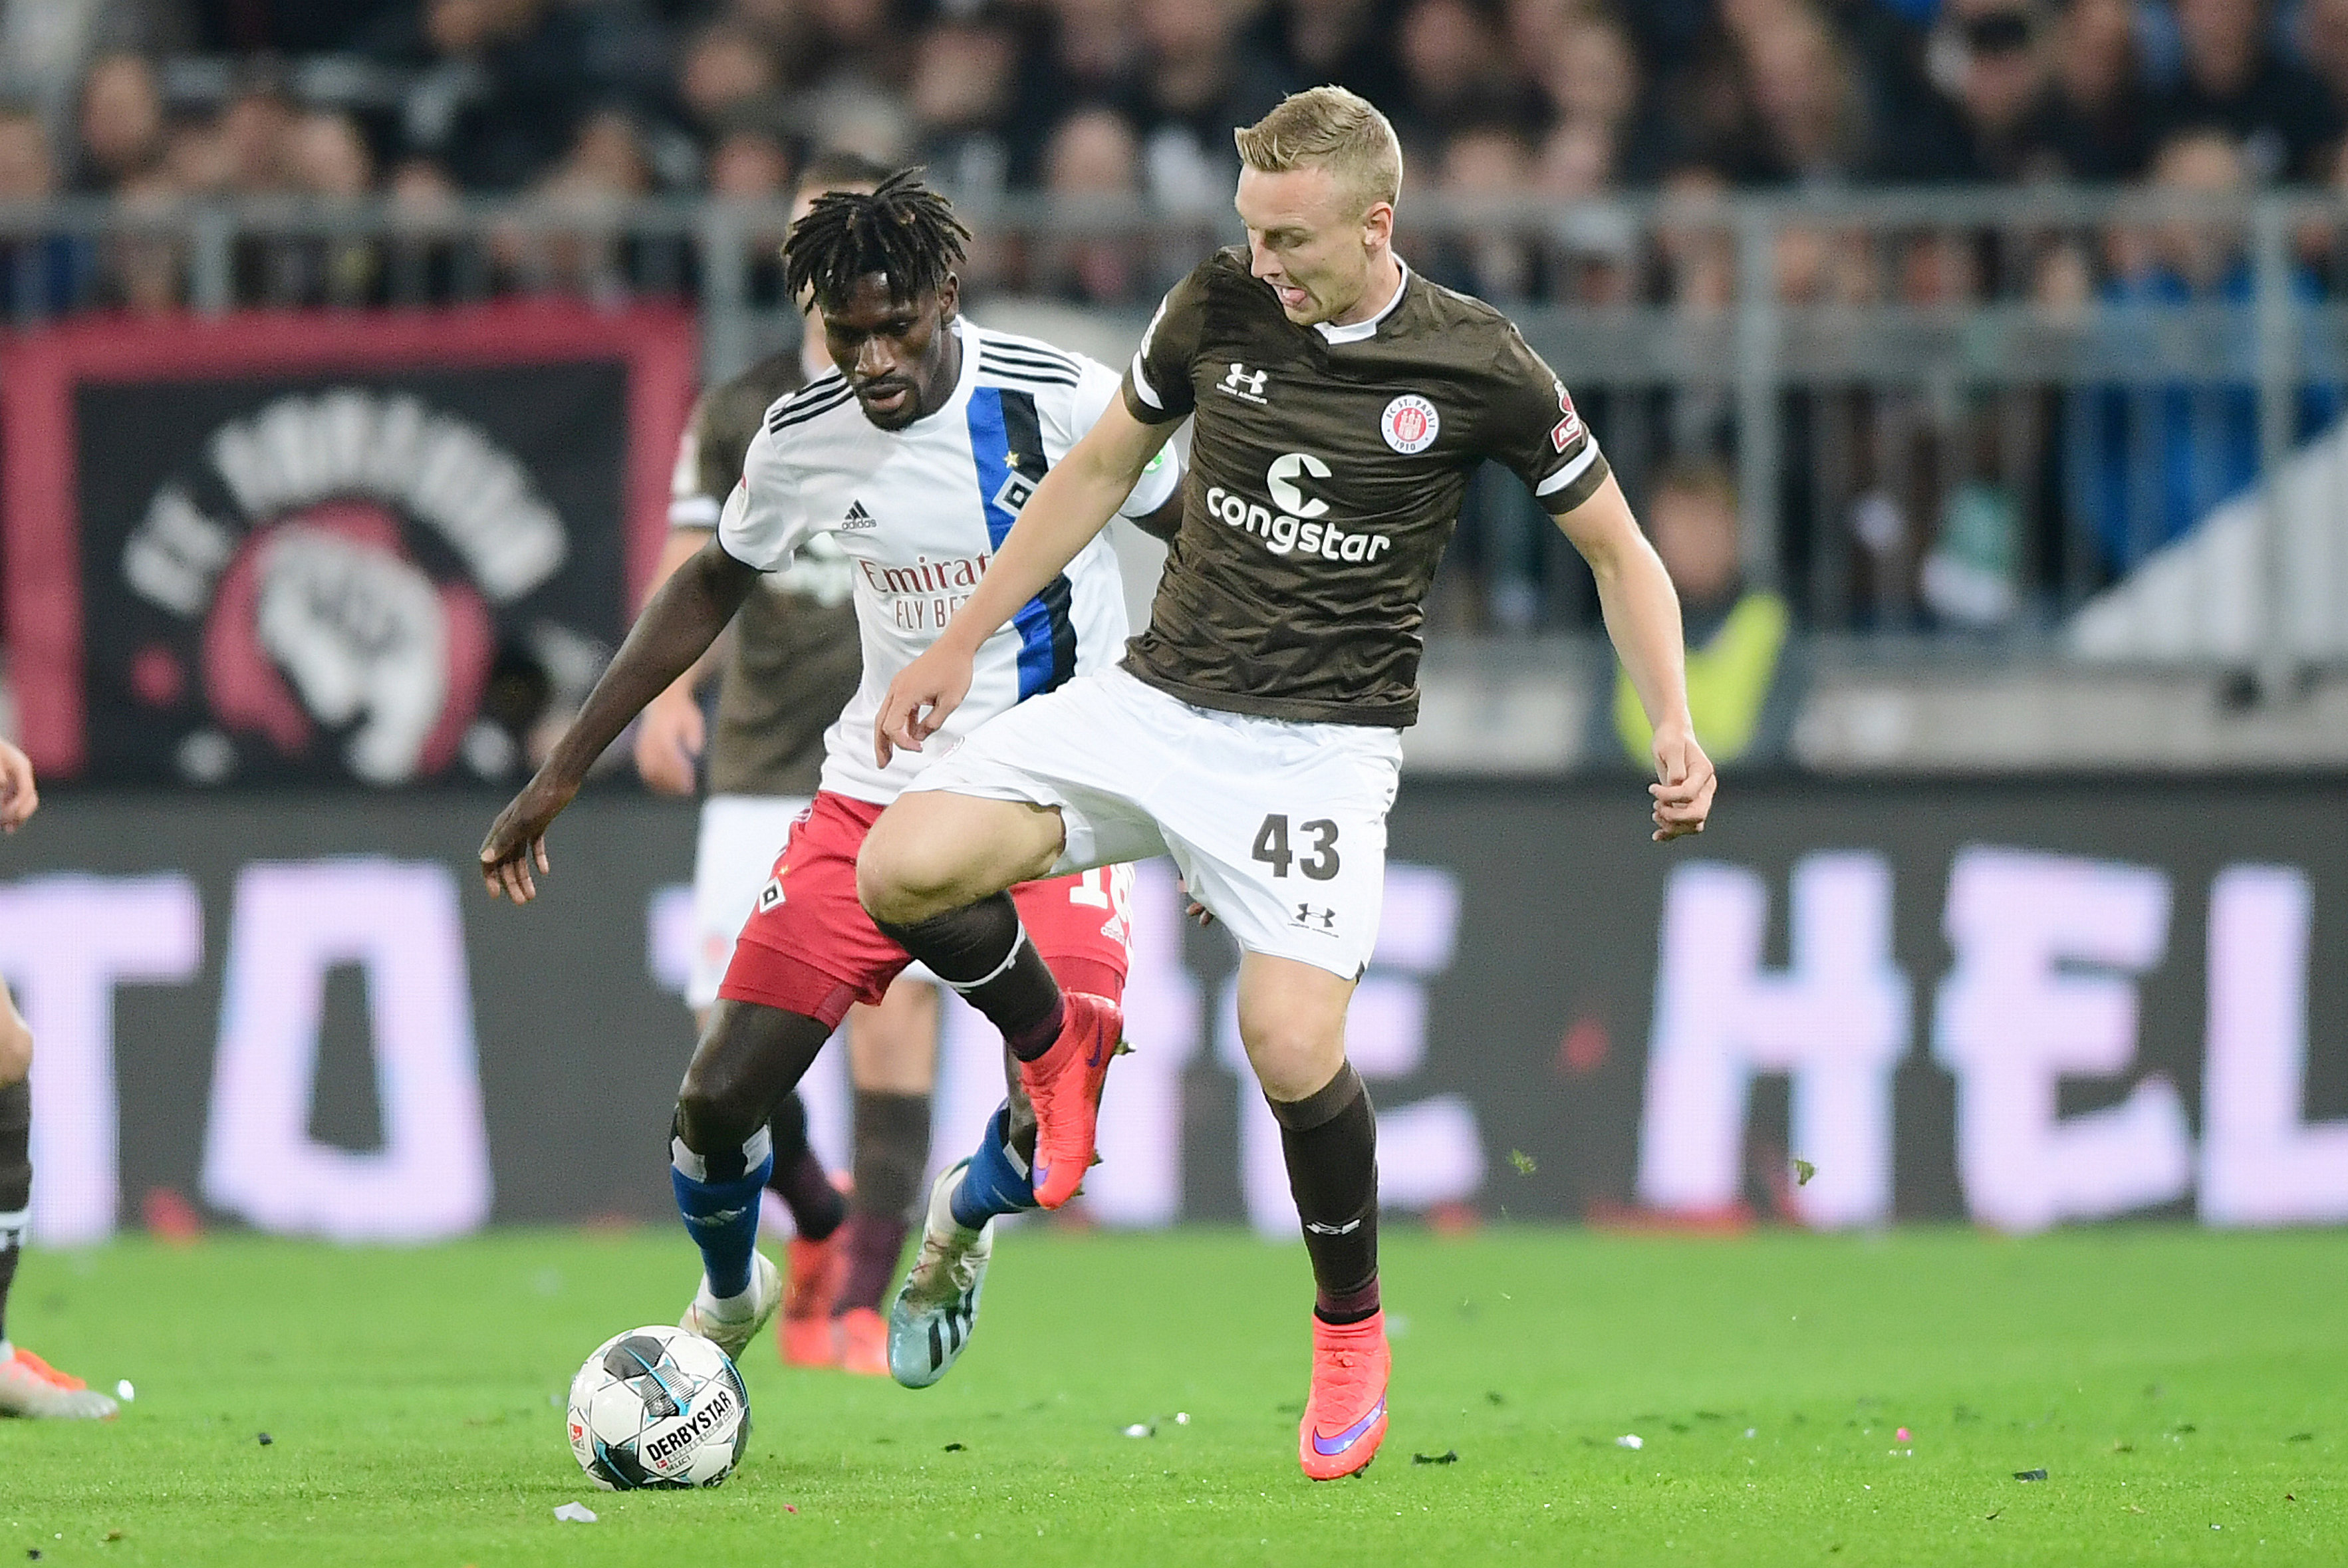 Sebastian Ohlsson (seen here under challenge from Bakery Jatta) made his competitive debut for the club in the 2-0 derby win over HSV, which he described as the highlight of the season so far.